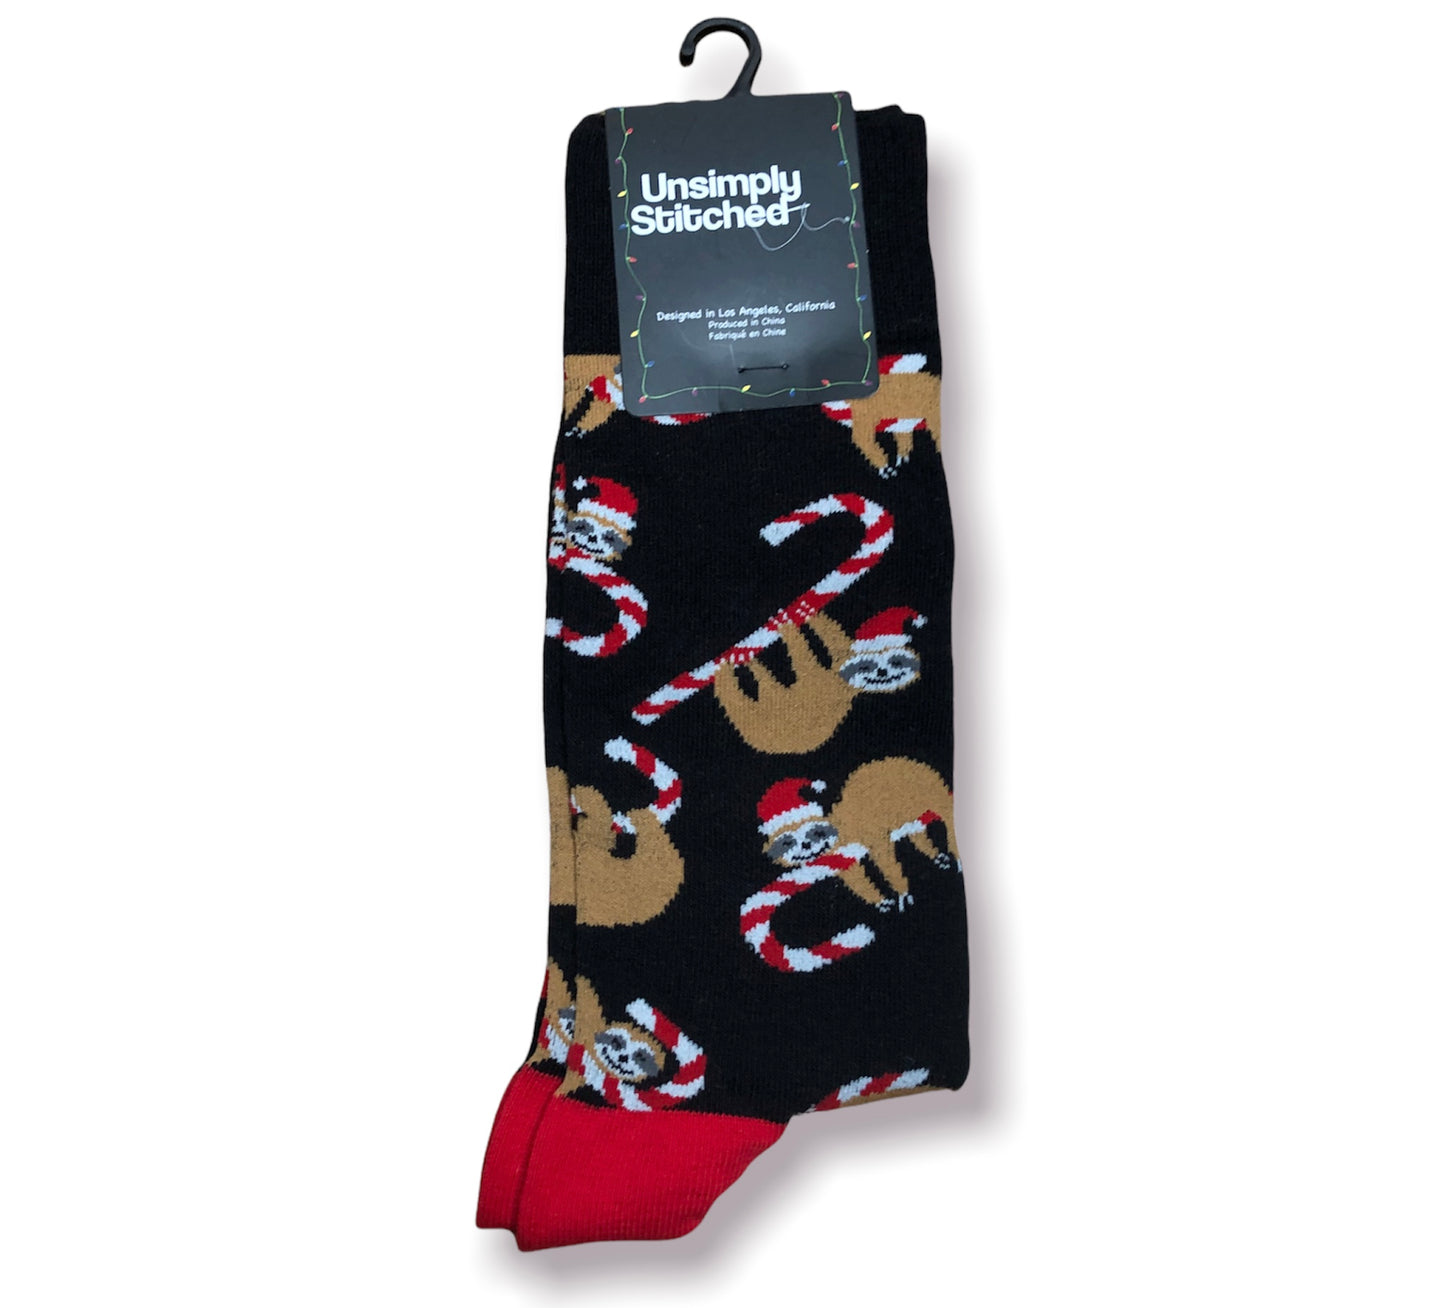 Unsimply Stitched Men's Novelty Crew Socks